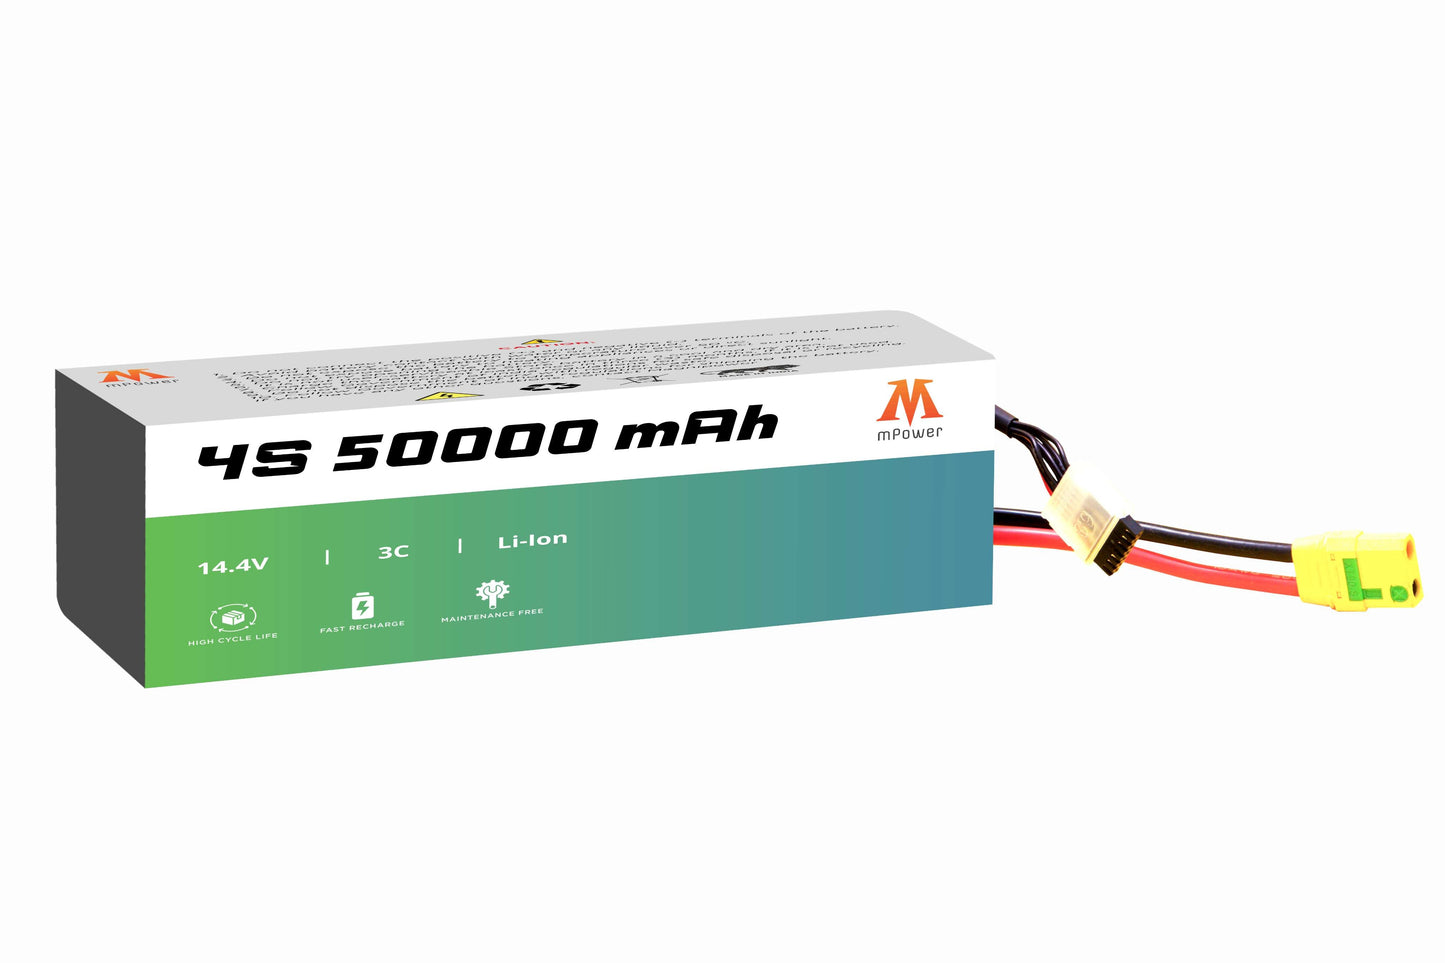 mPower 4S 50000mAh Lithium-Ion Battery for Surveillance Drones